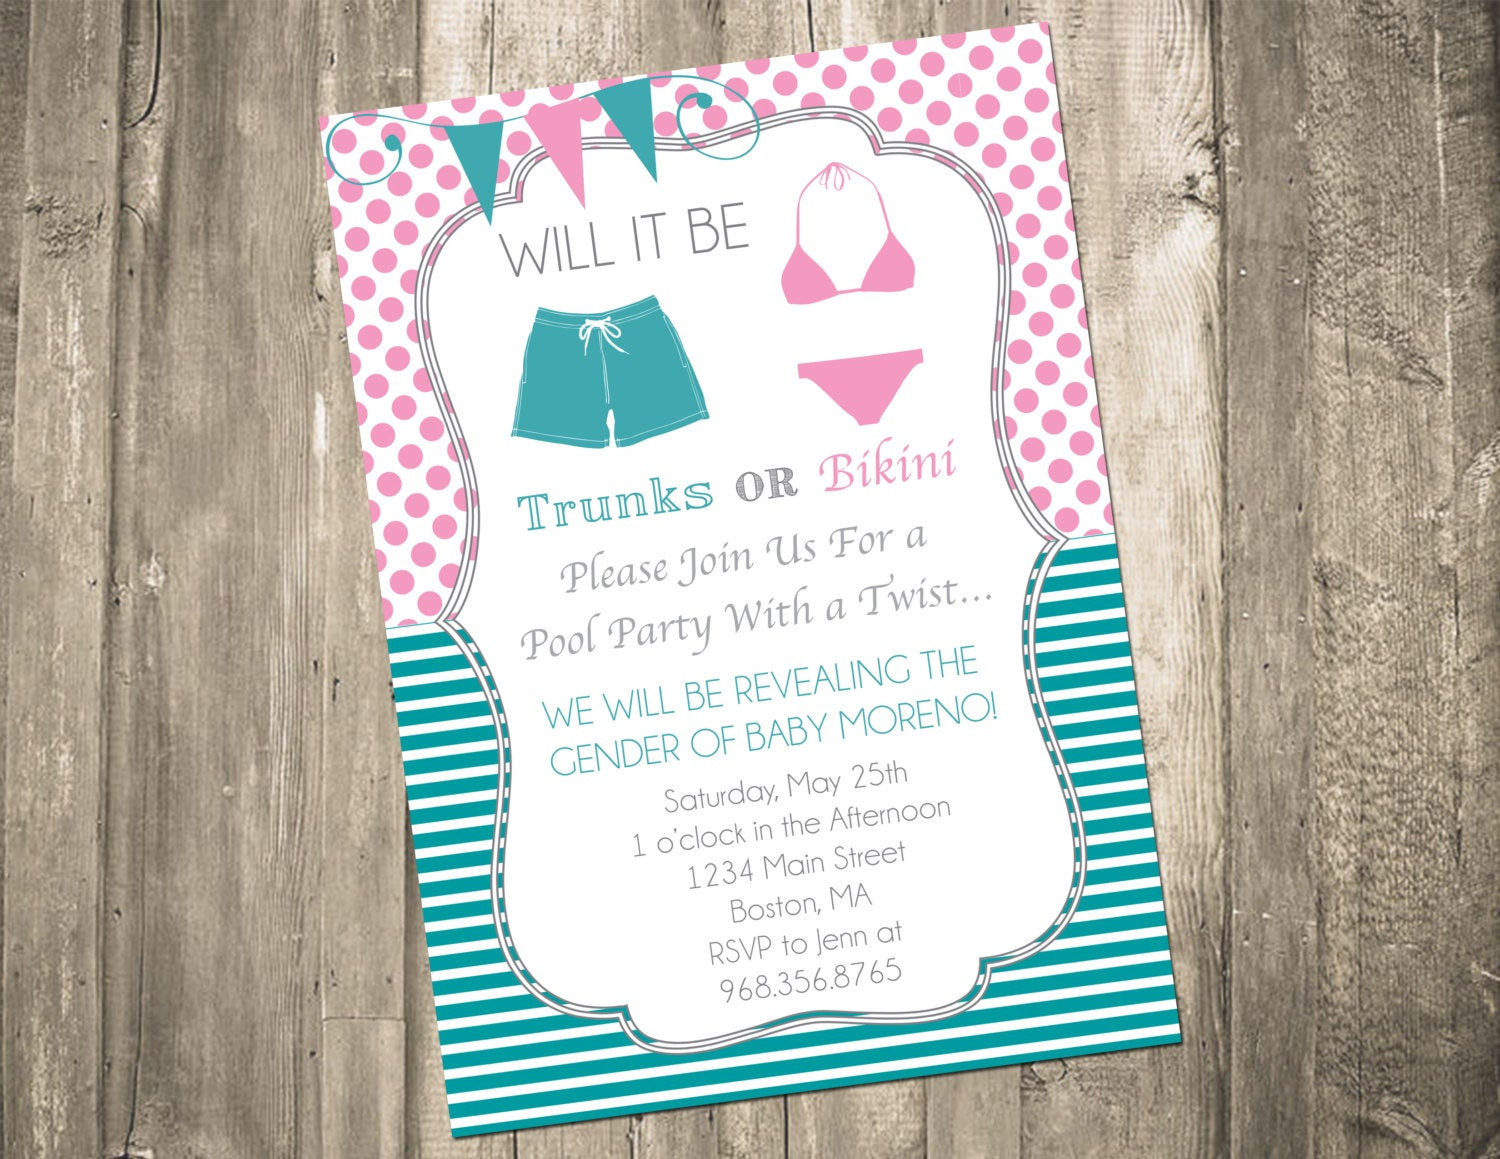 Baby Pool Party
 Pool Party Gender Reveal Invitation Bikini by